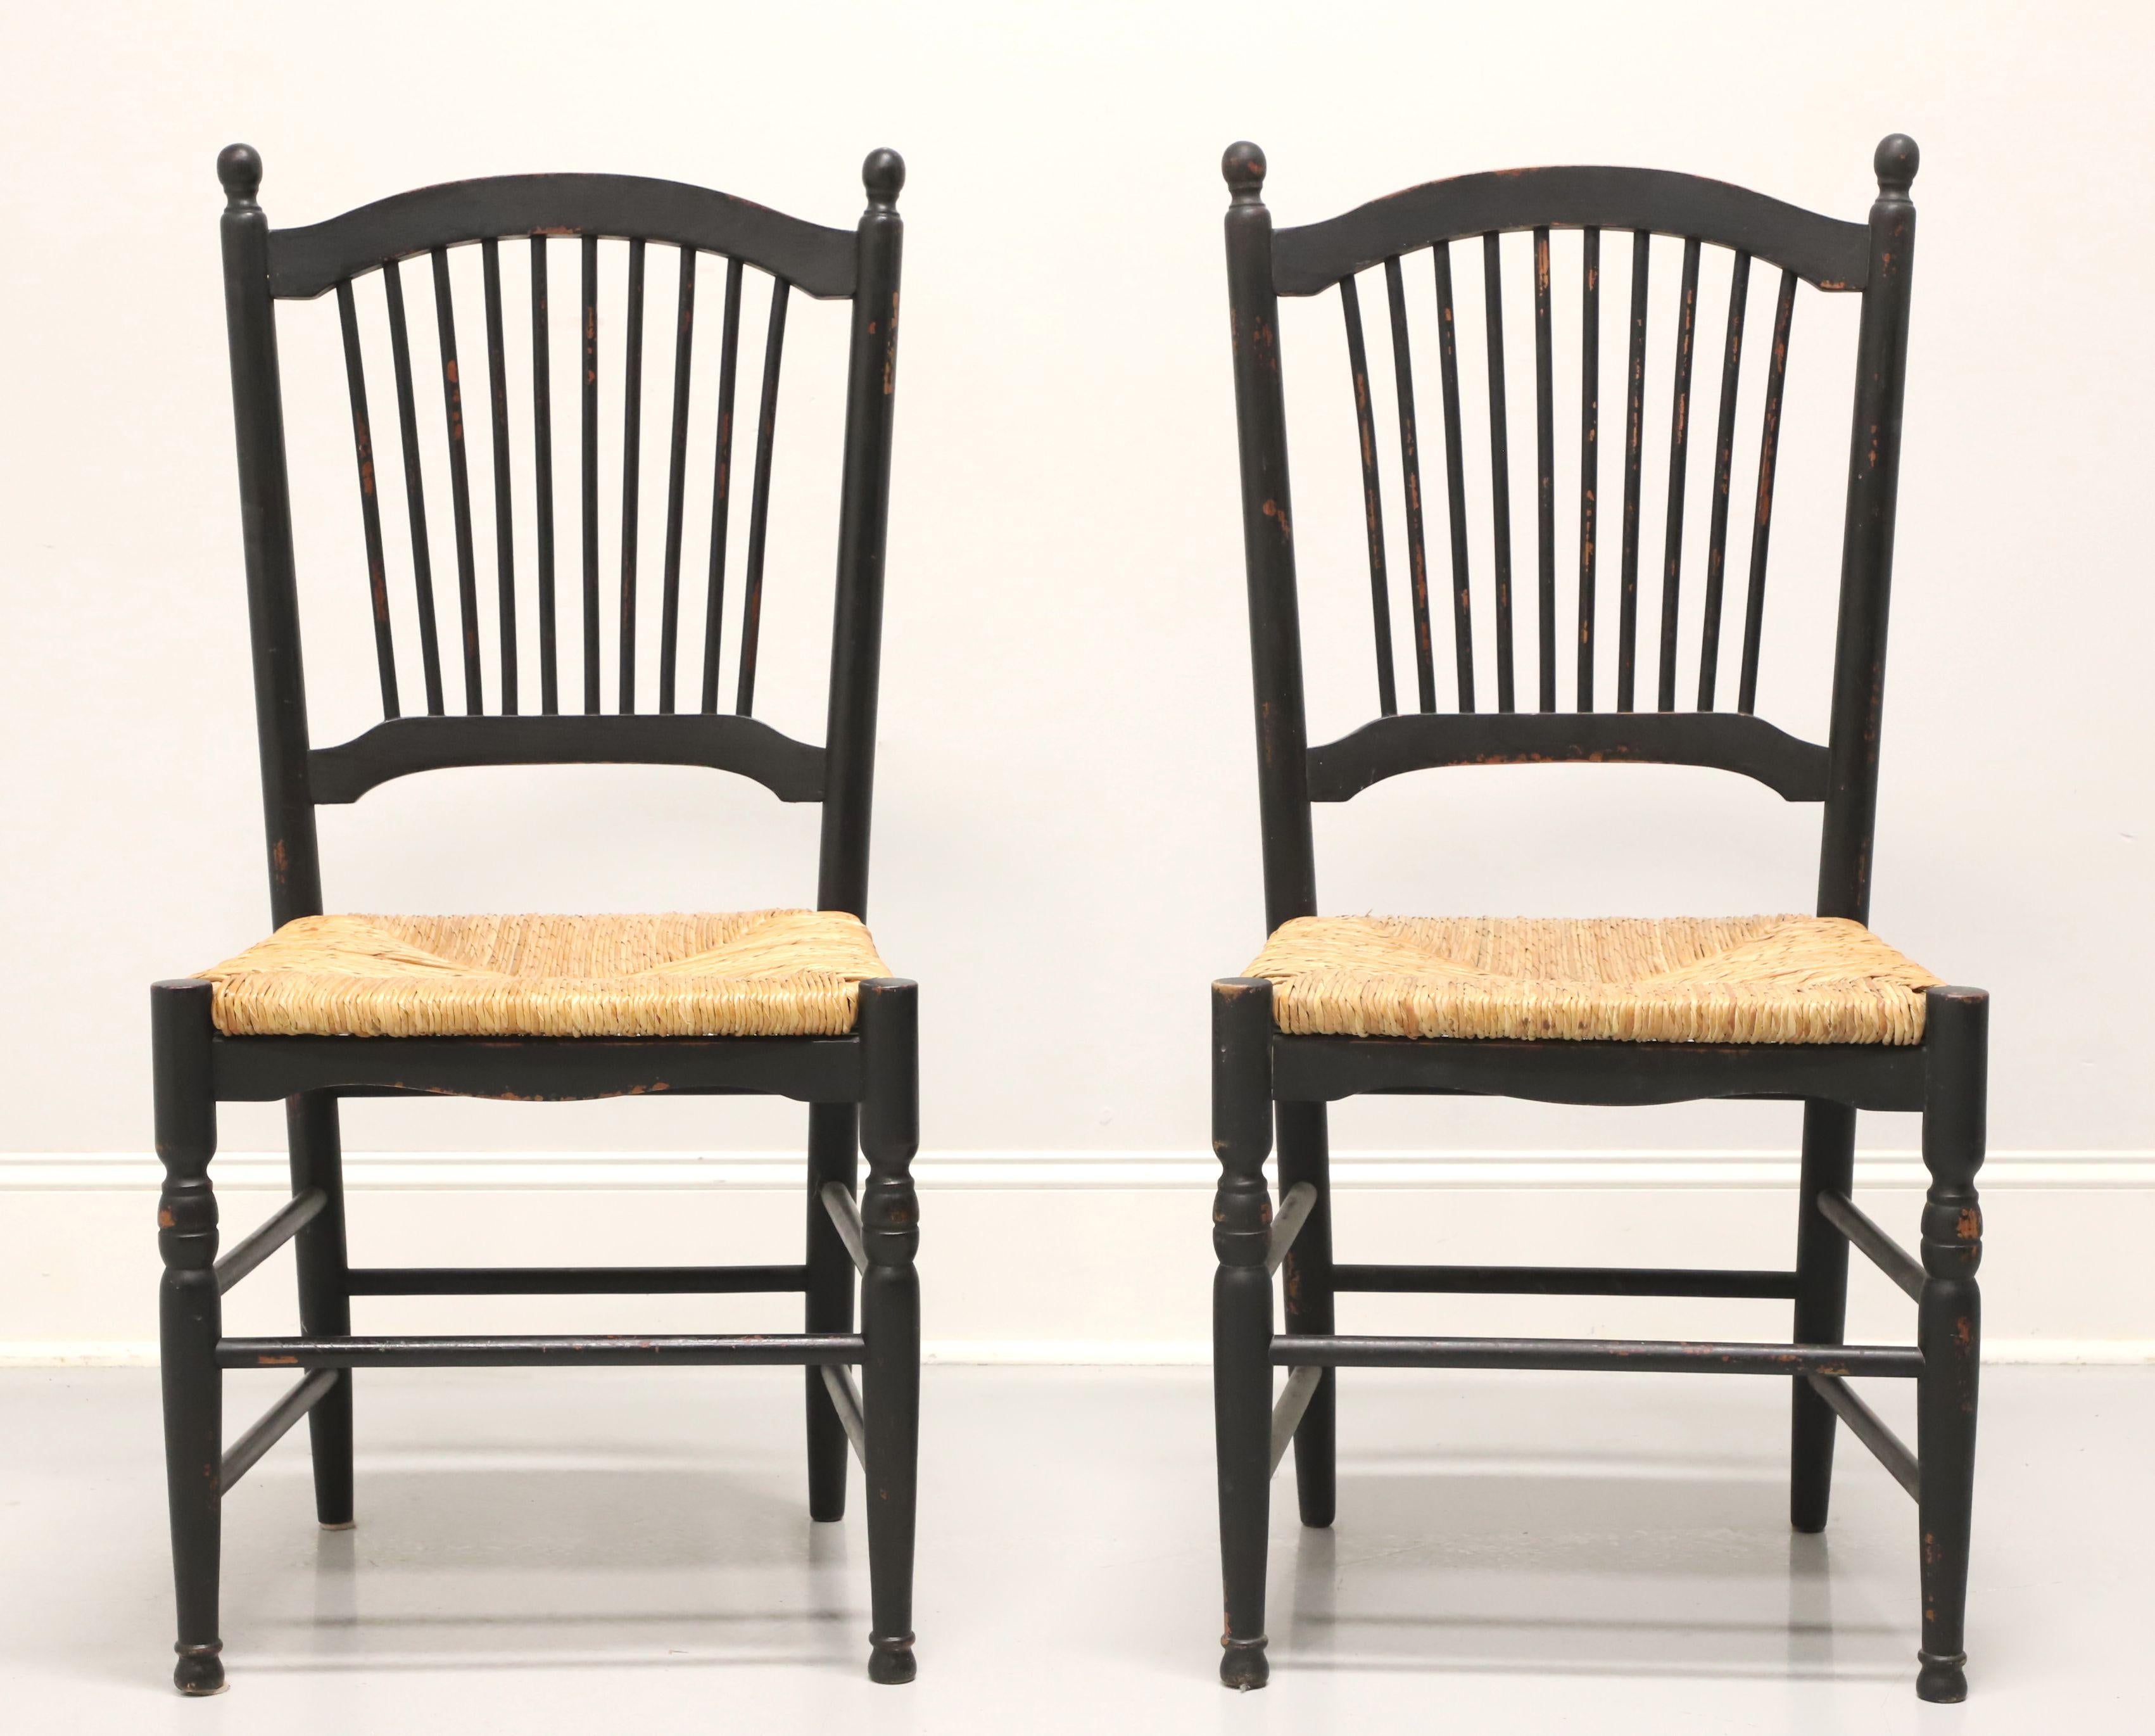 Rustic Distressed Black Cottage Style Dining Side Chairs with Rush Seats - Pair B